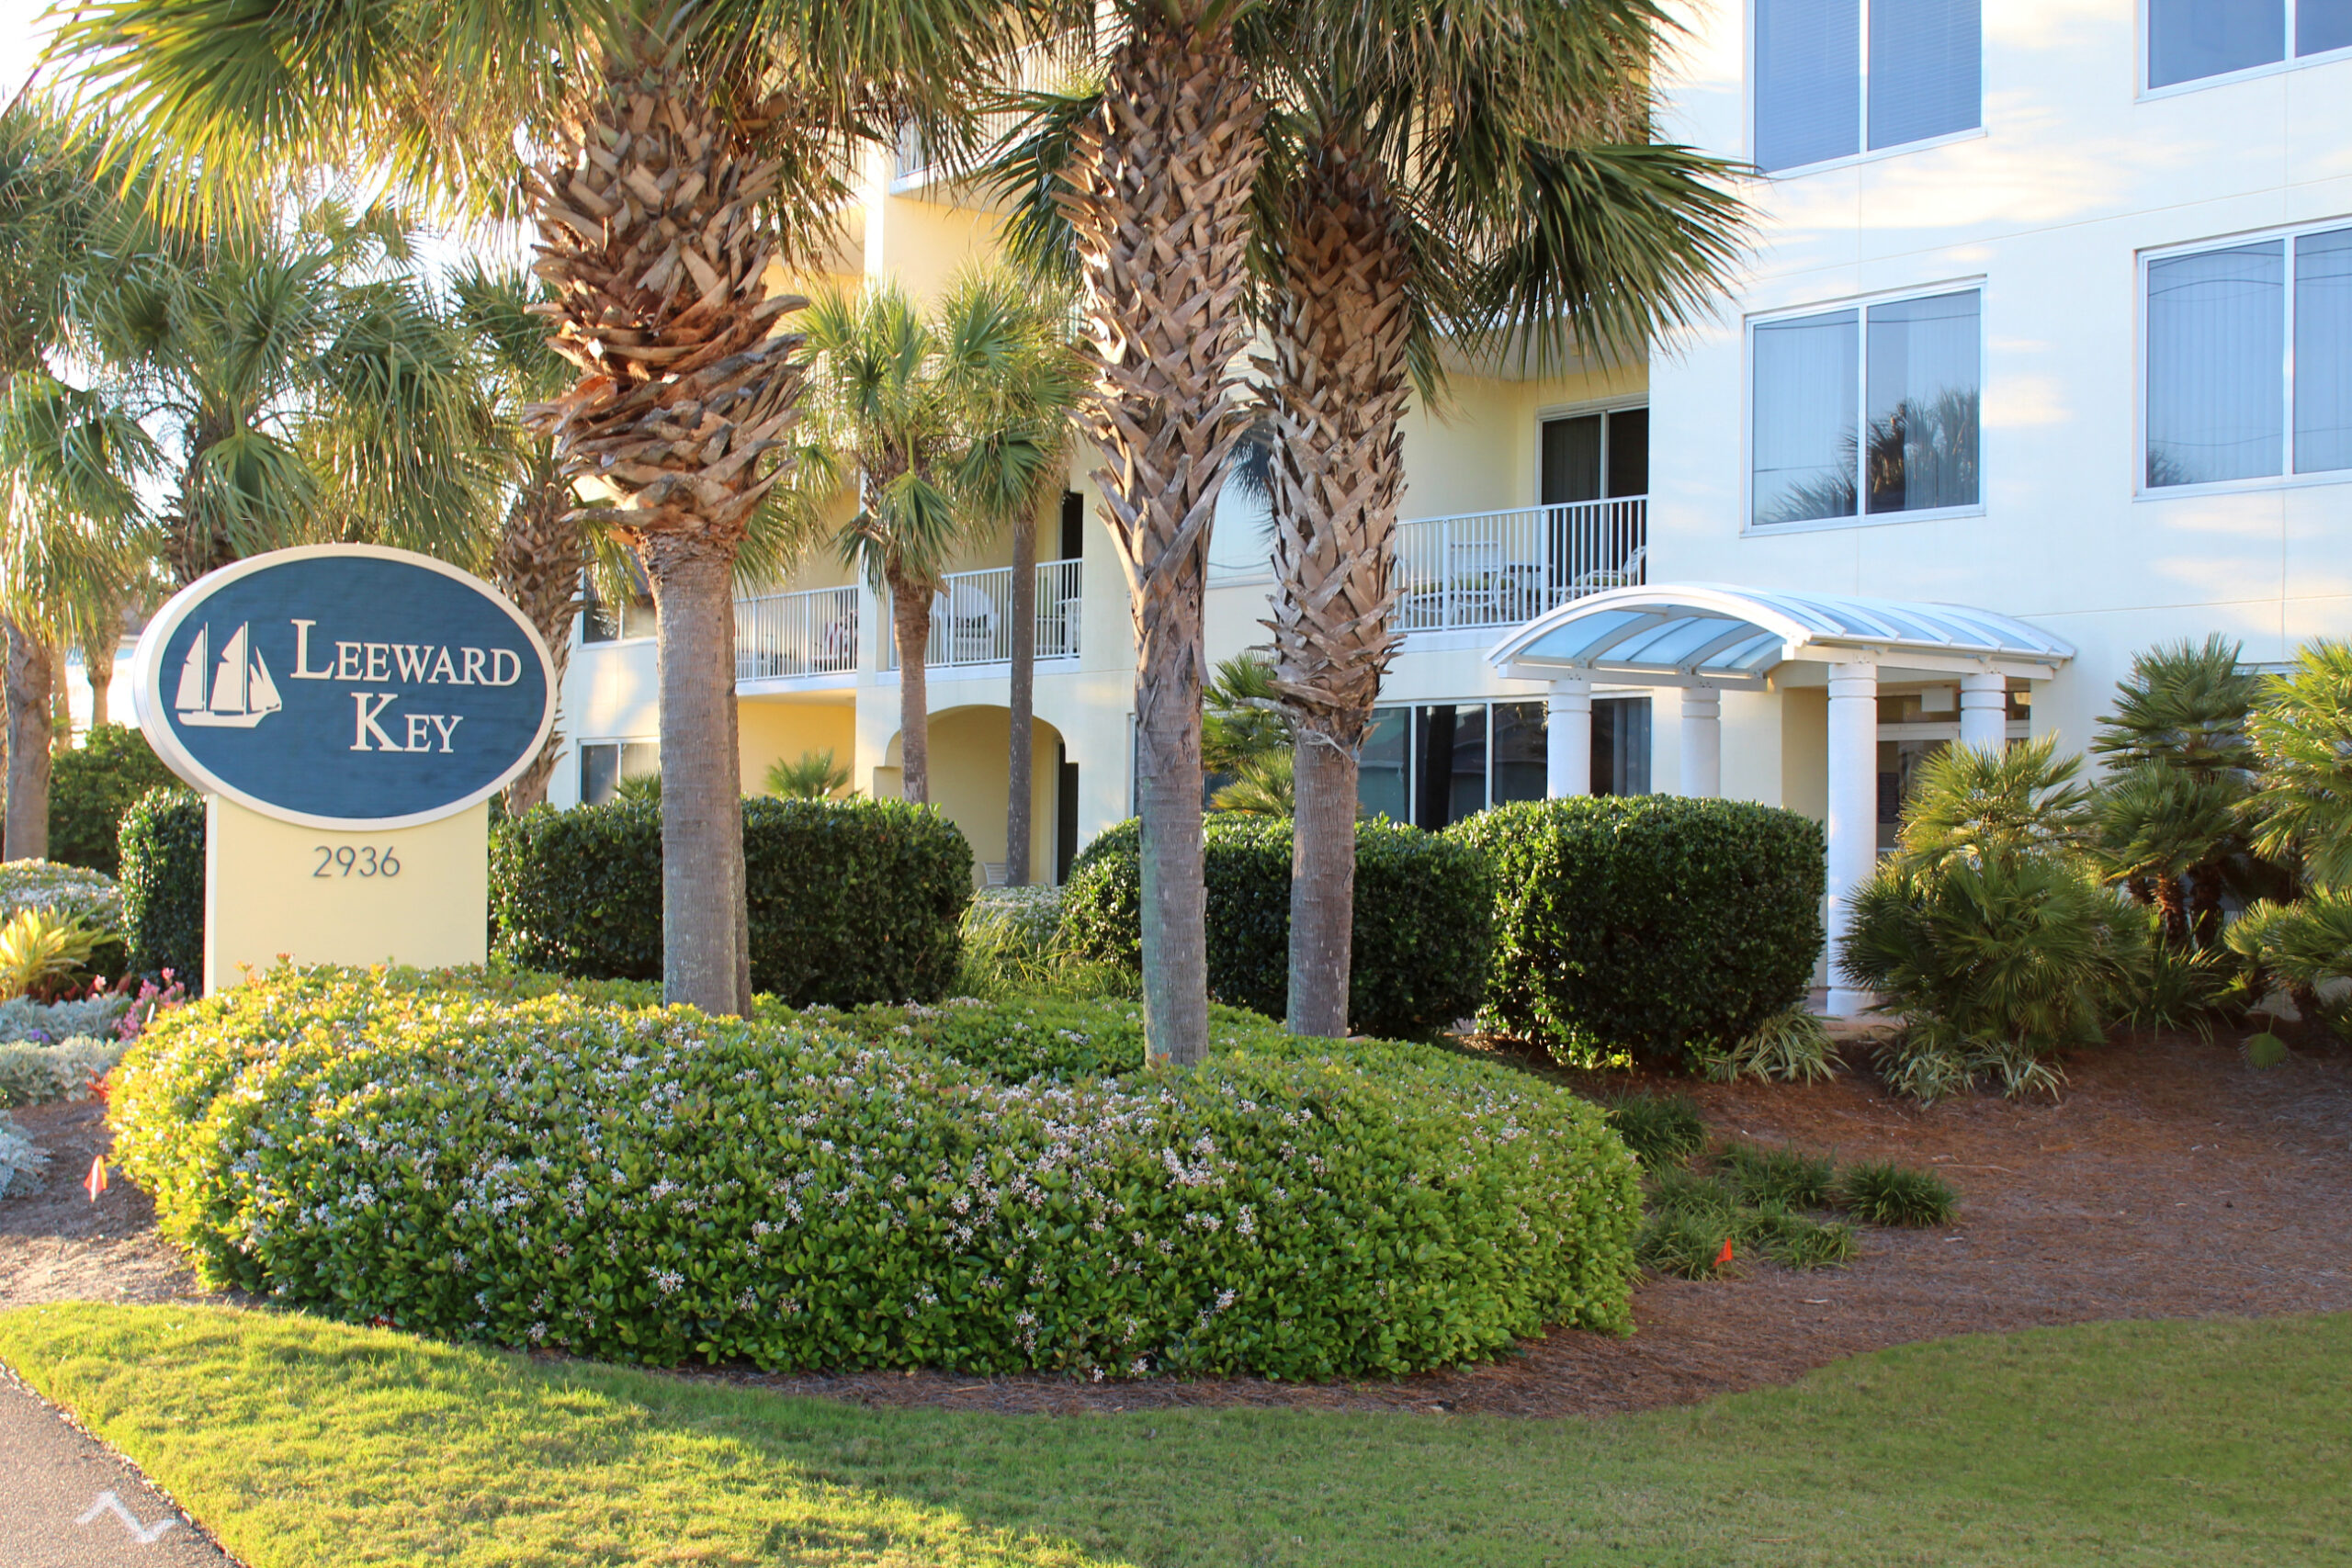 Leeward Key in the Destin area features stunning views of sugary white sandy beach of the Emerald Coast